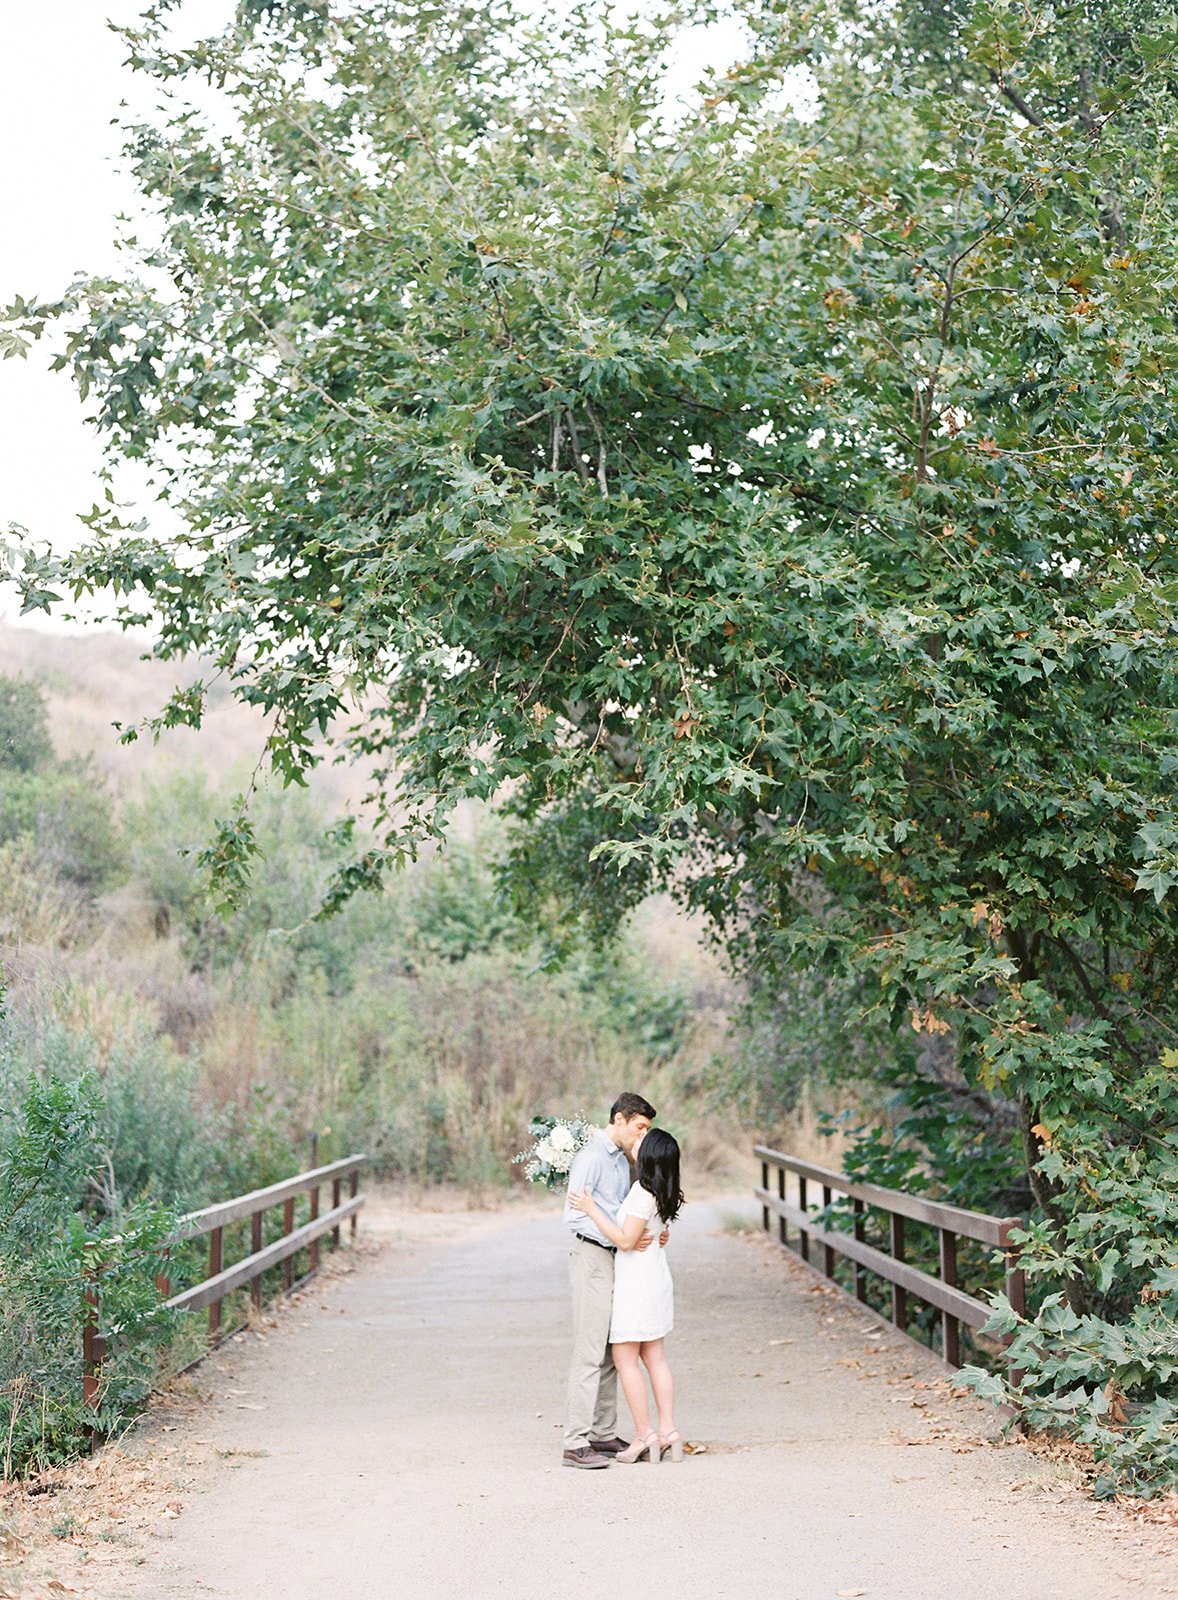 Danielle_Bacon_Photography_Solstice_Canyon_Engagement_10.jpg